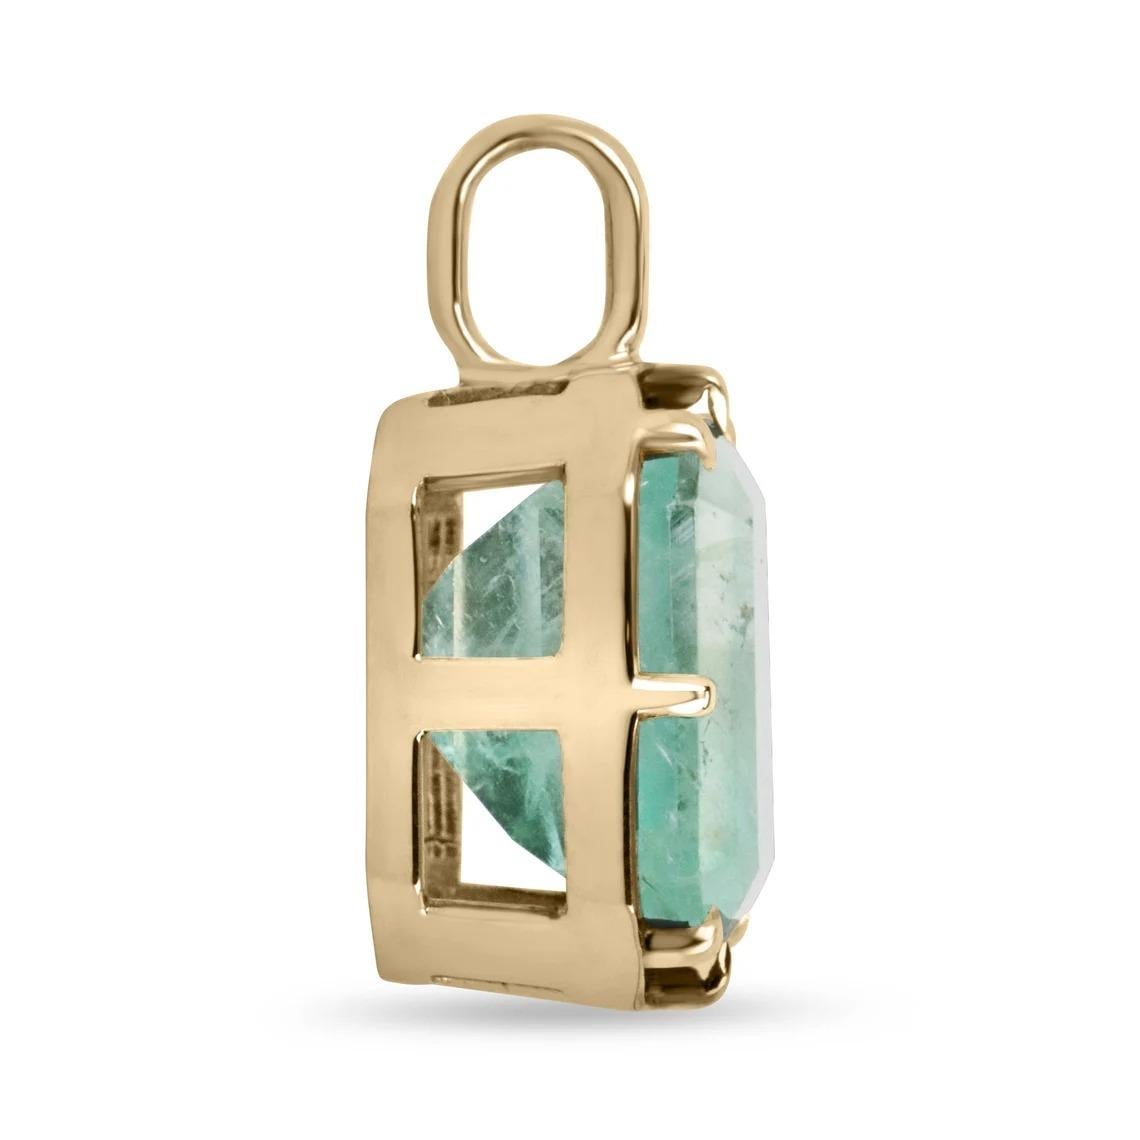 Displayed is a natural emerald Georgian-styled solitaire pendant in 14K yellow gold. This gorgeous solitaire pendant carries a full 16.40-carat Colombian emerald in a prong setting. Black rhodium highlights the emeralds' bezel and prongs. Fully